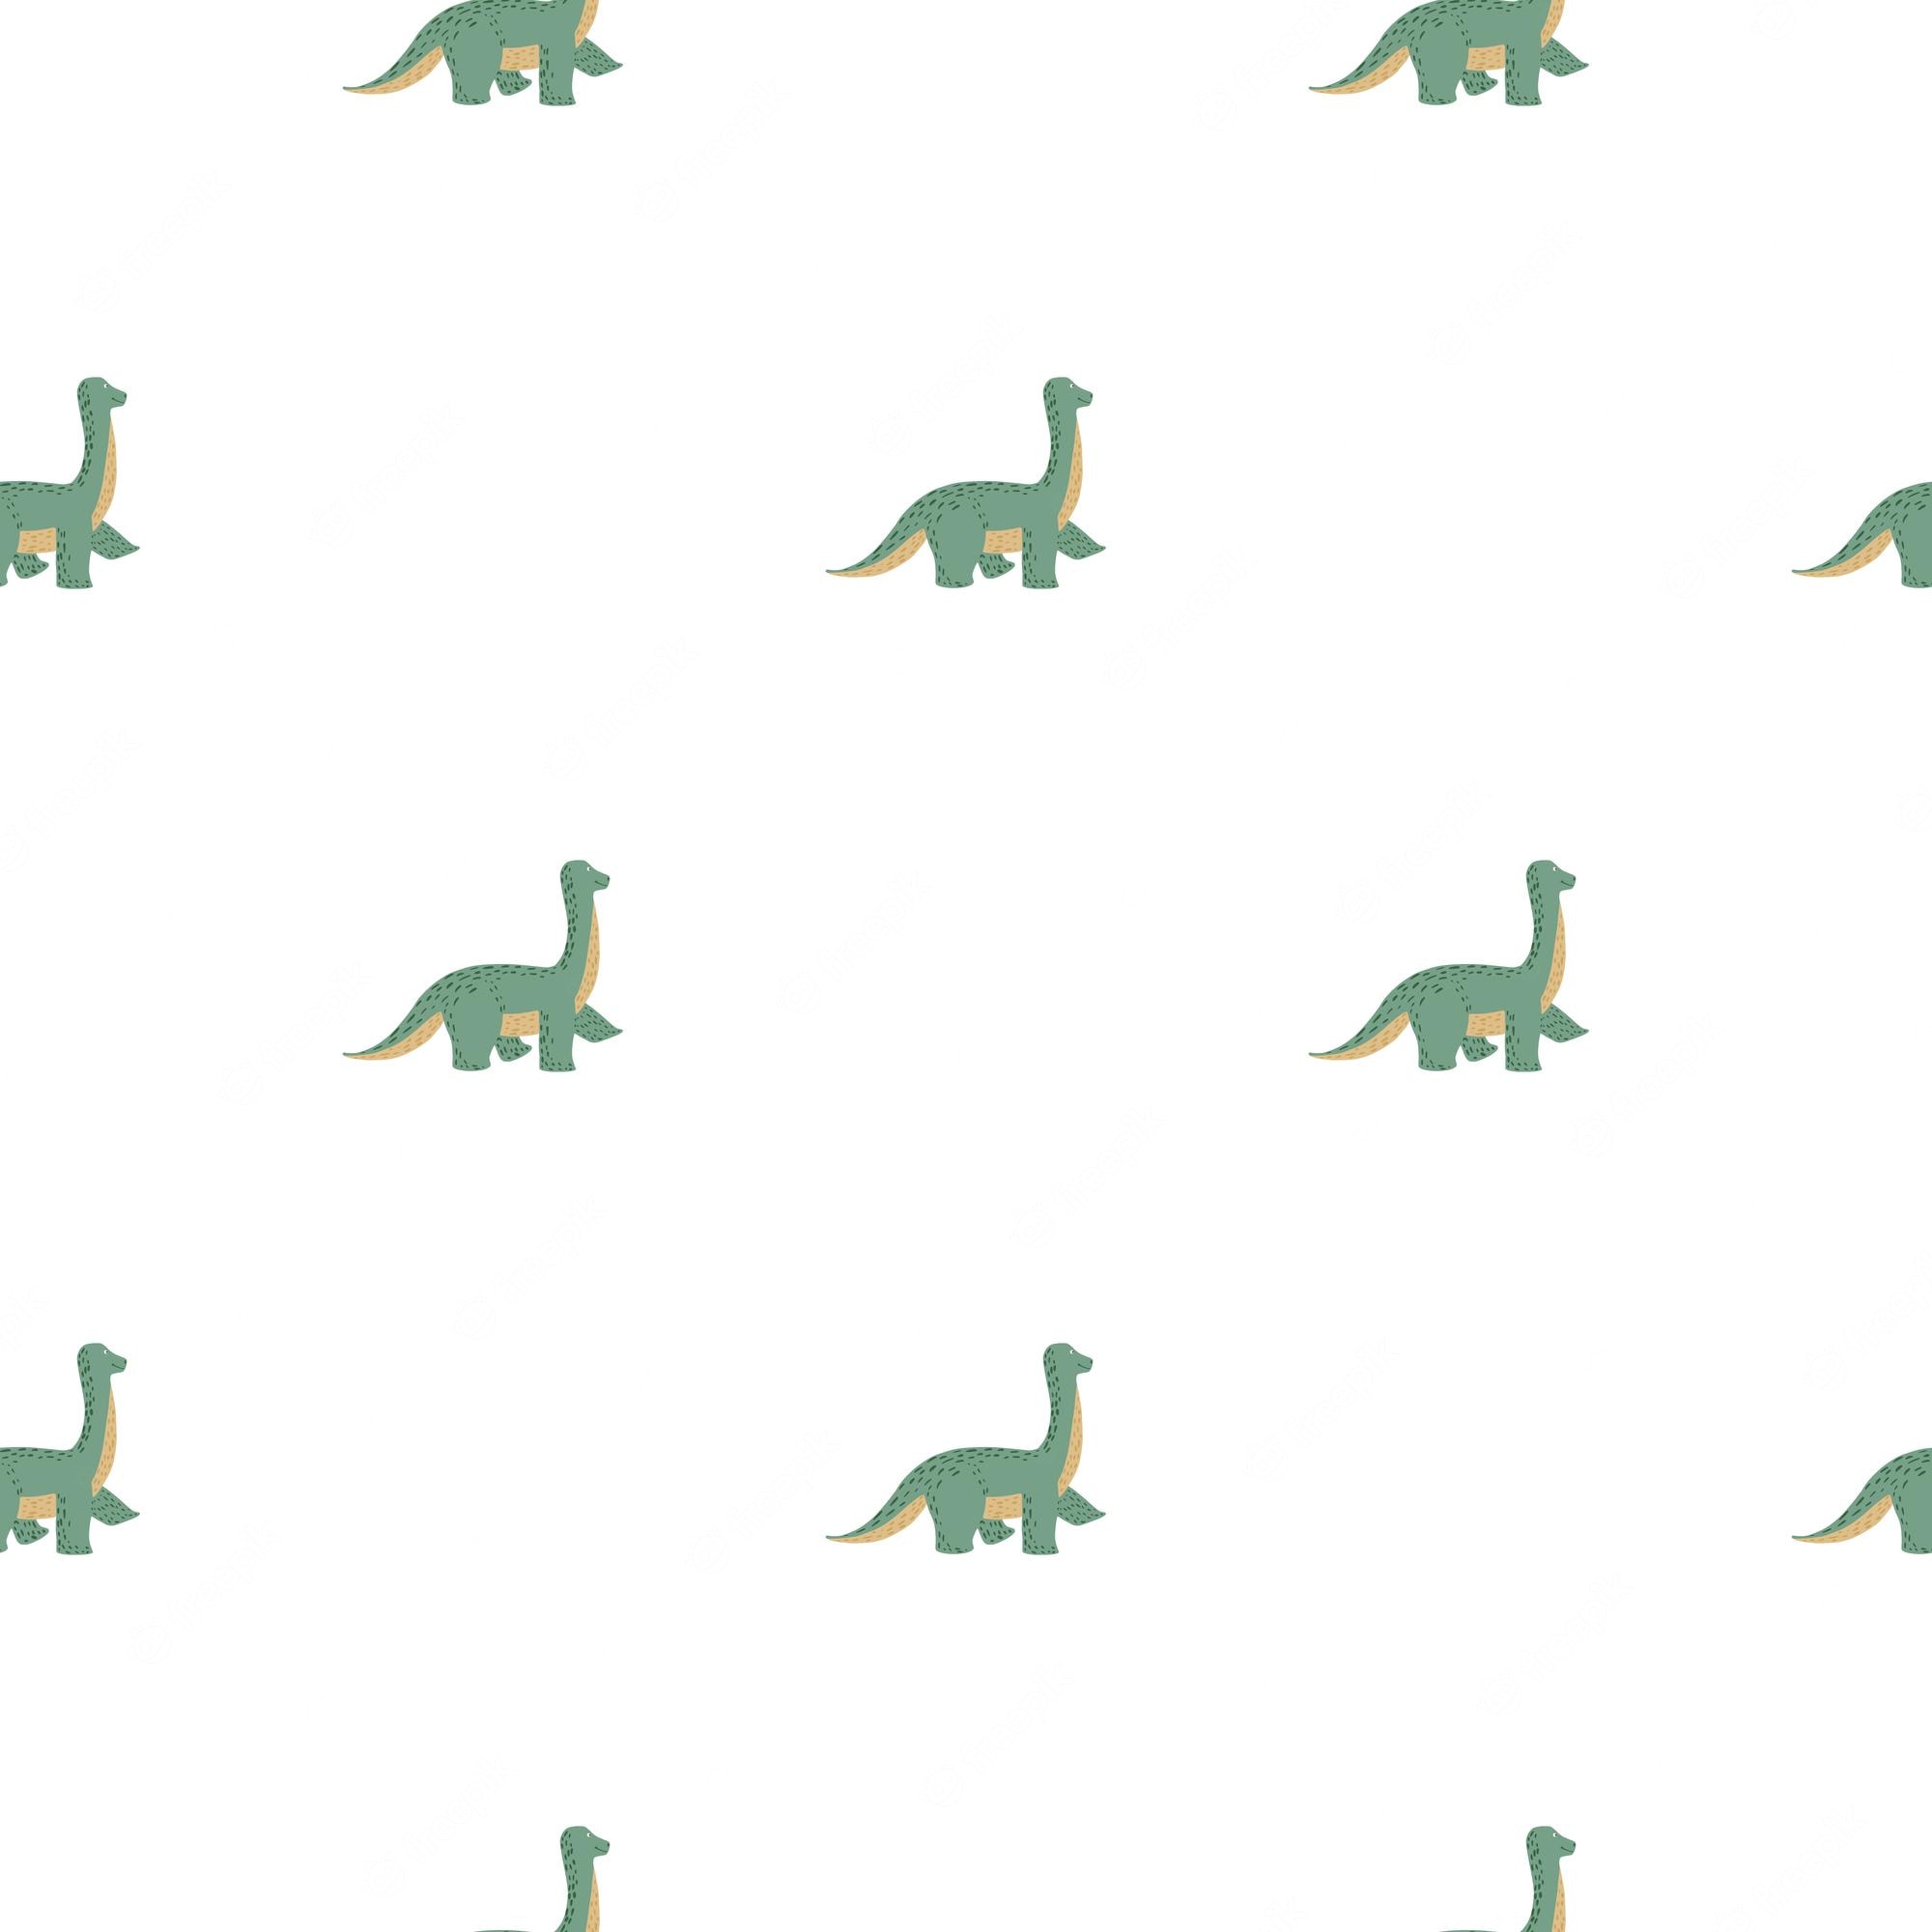 A pattern of green and yellow baby dinosaurs on a white background - Dinosaur